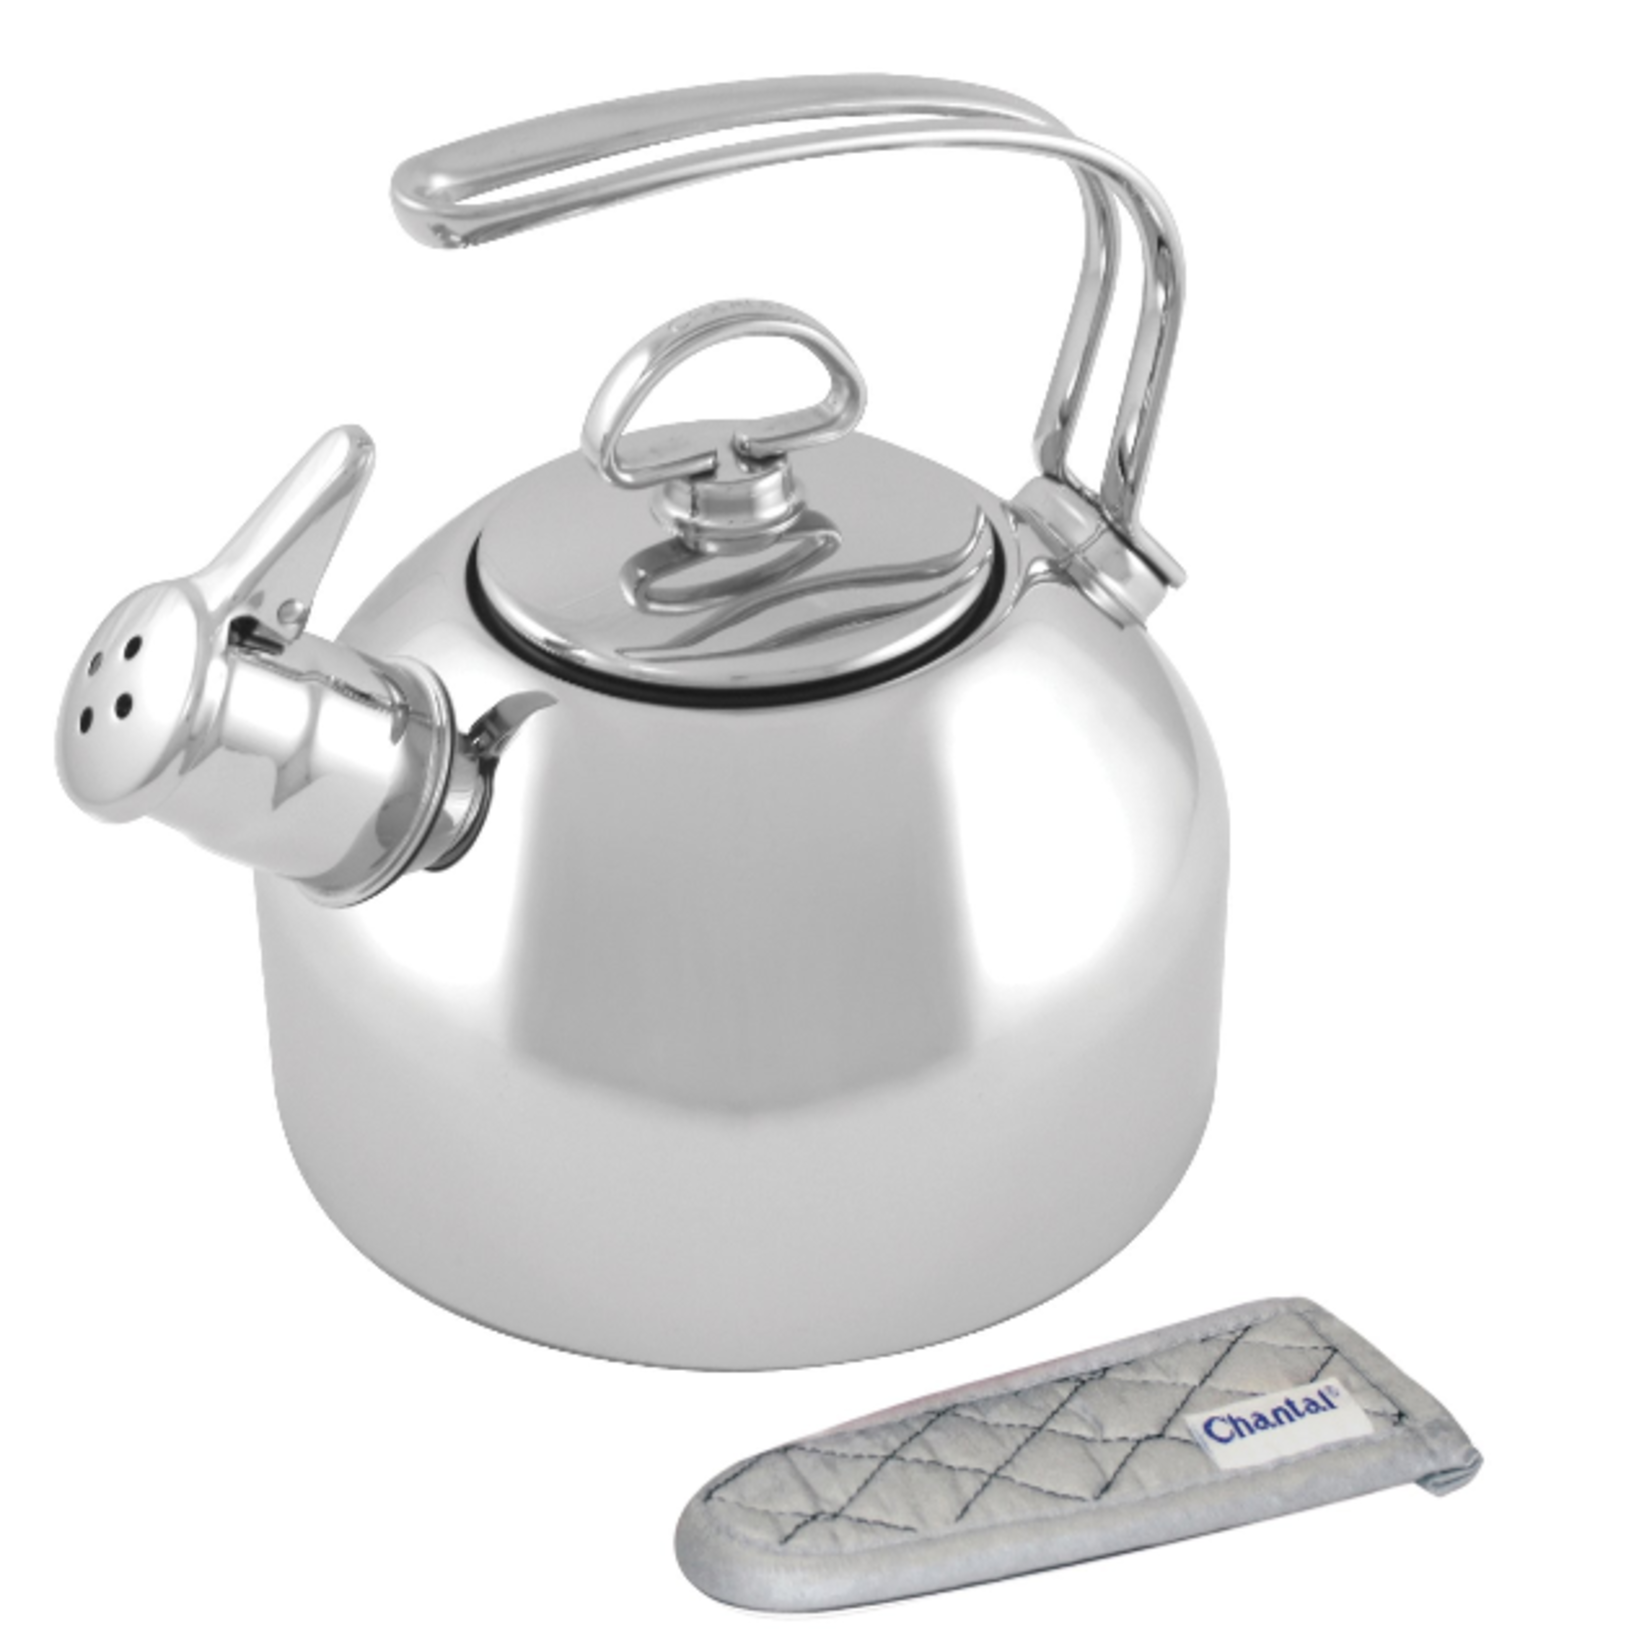 Chantal Classic SS Whistling Teakettle